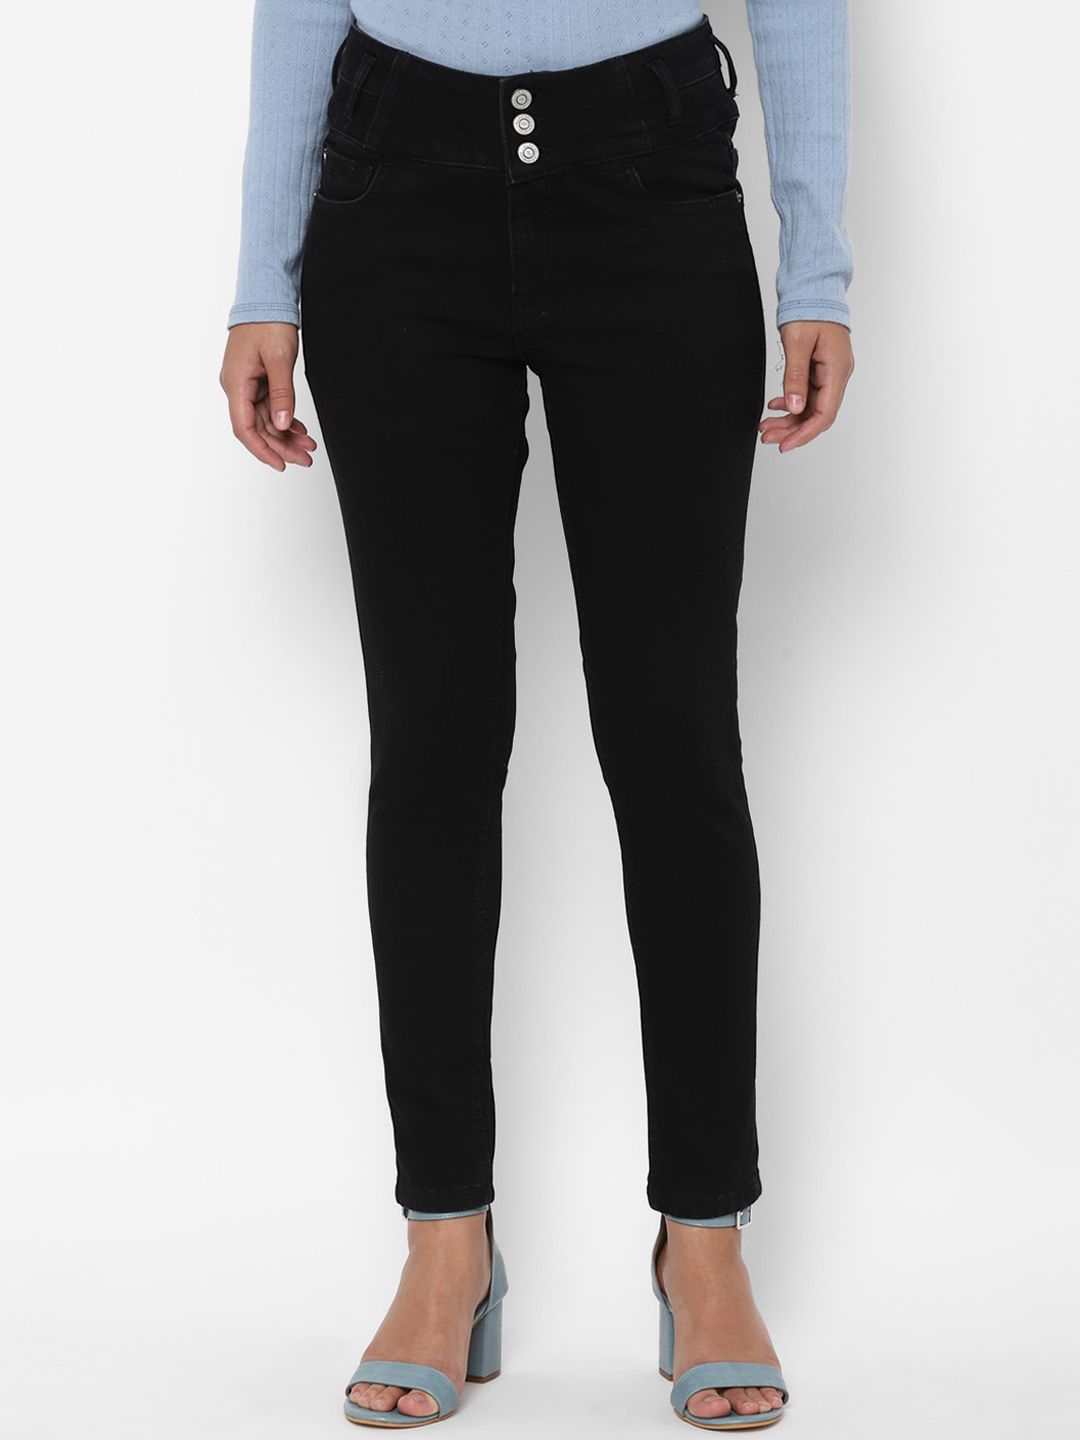 Allen Solly Woman Women Black Skinny Fit High-Rise Jeans Price in India